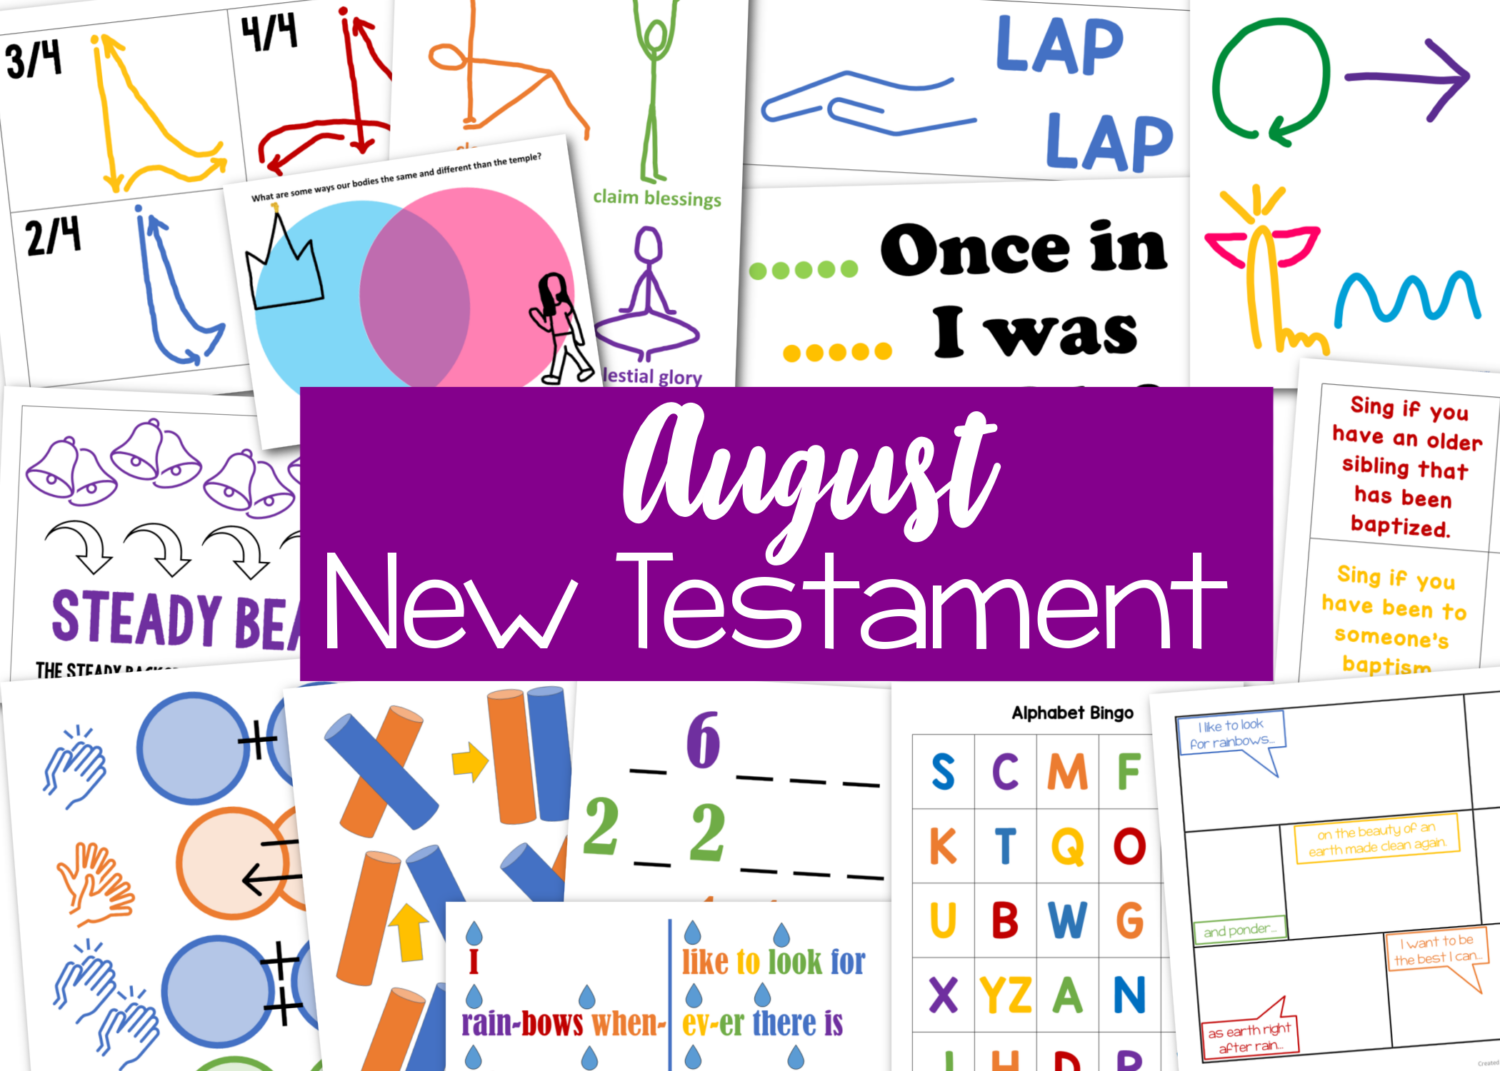 New Testament August Primary Songs Easy ideas for Music Leaders New Testament August